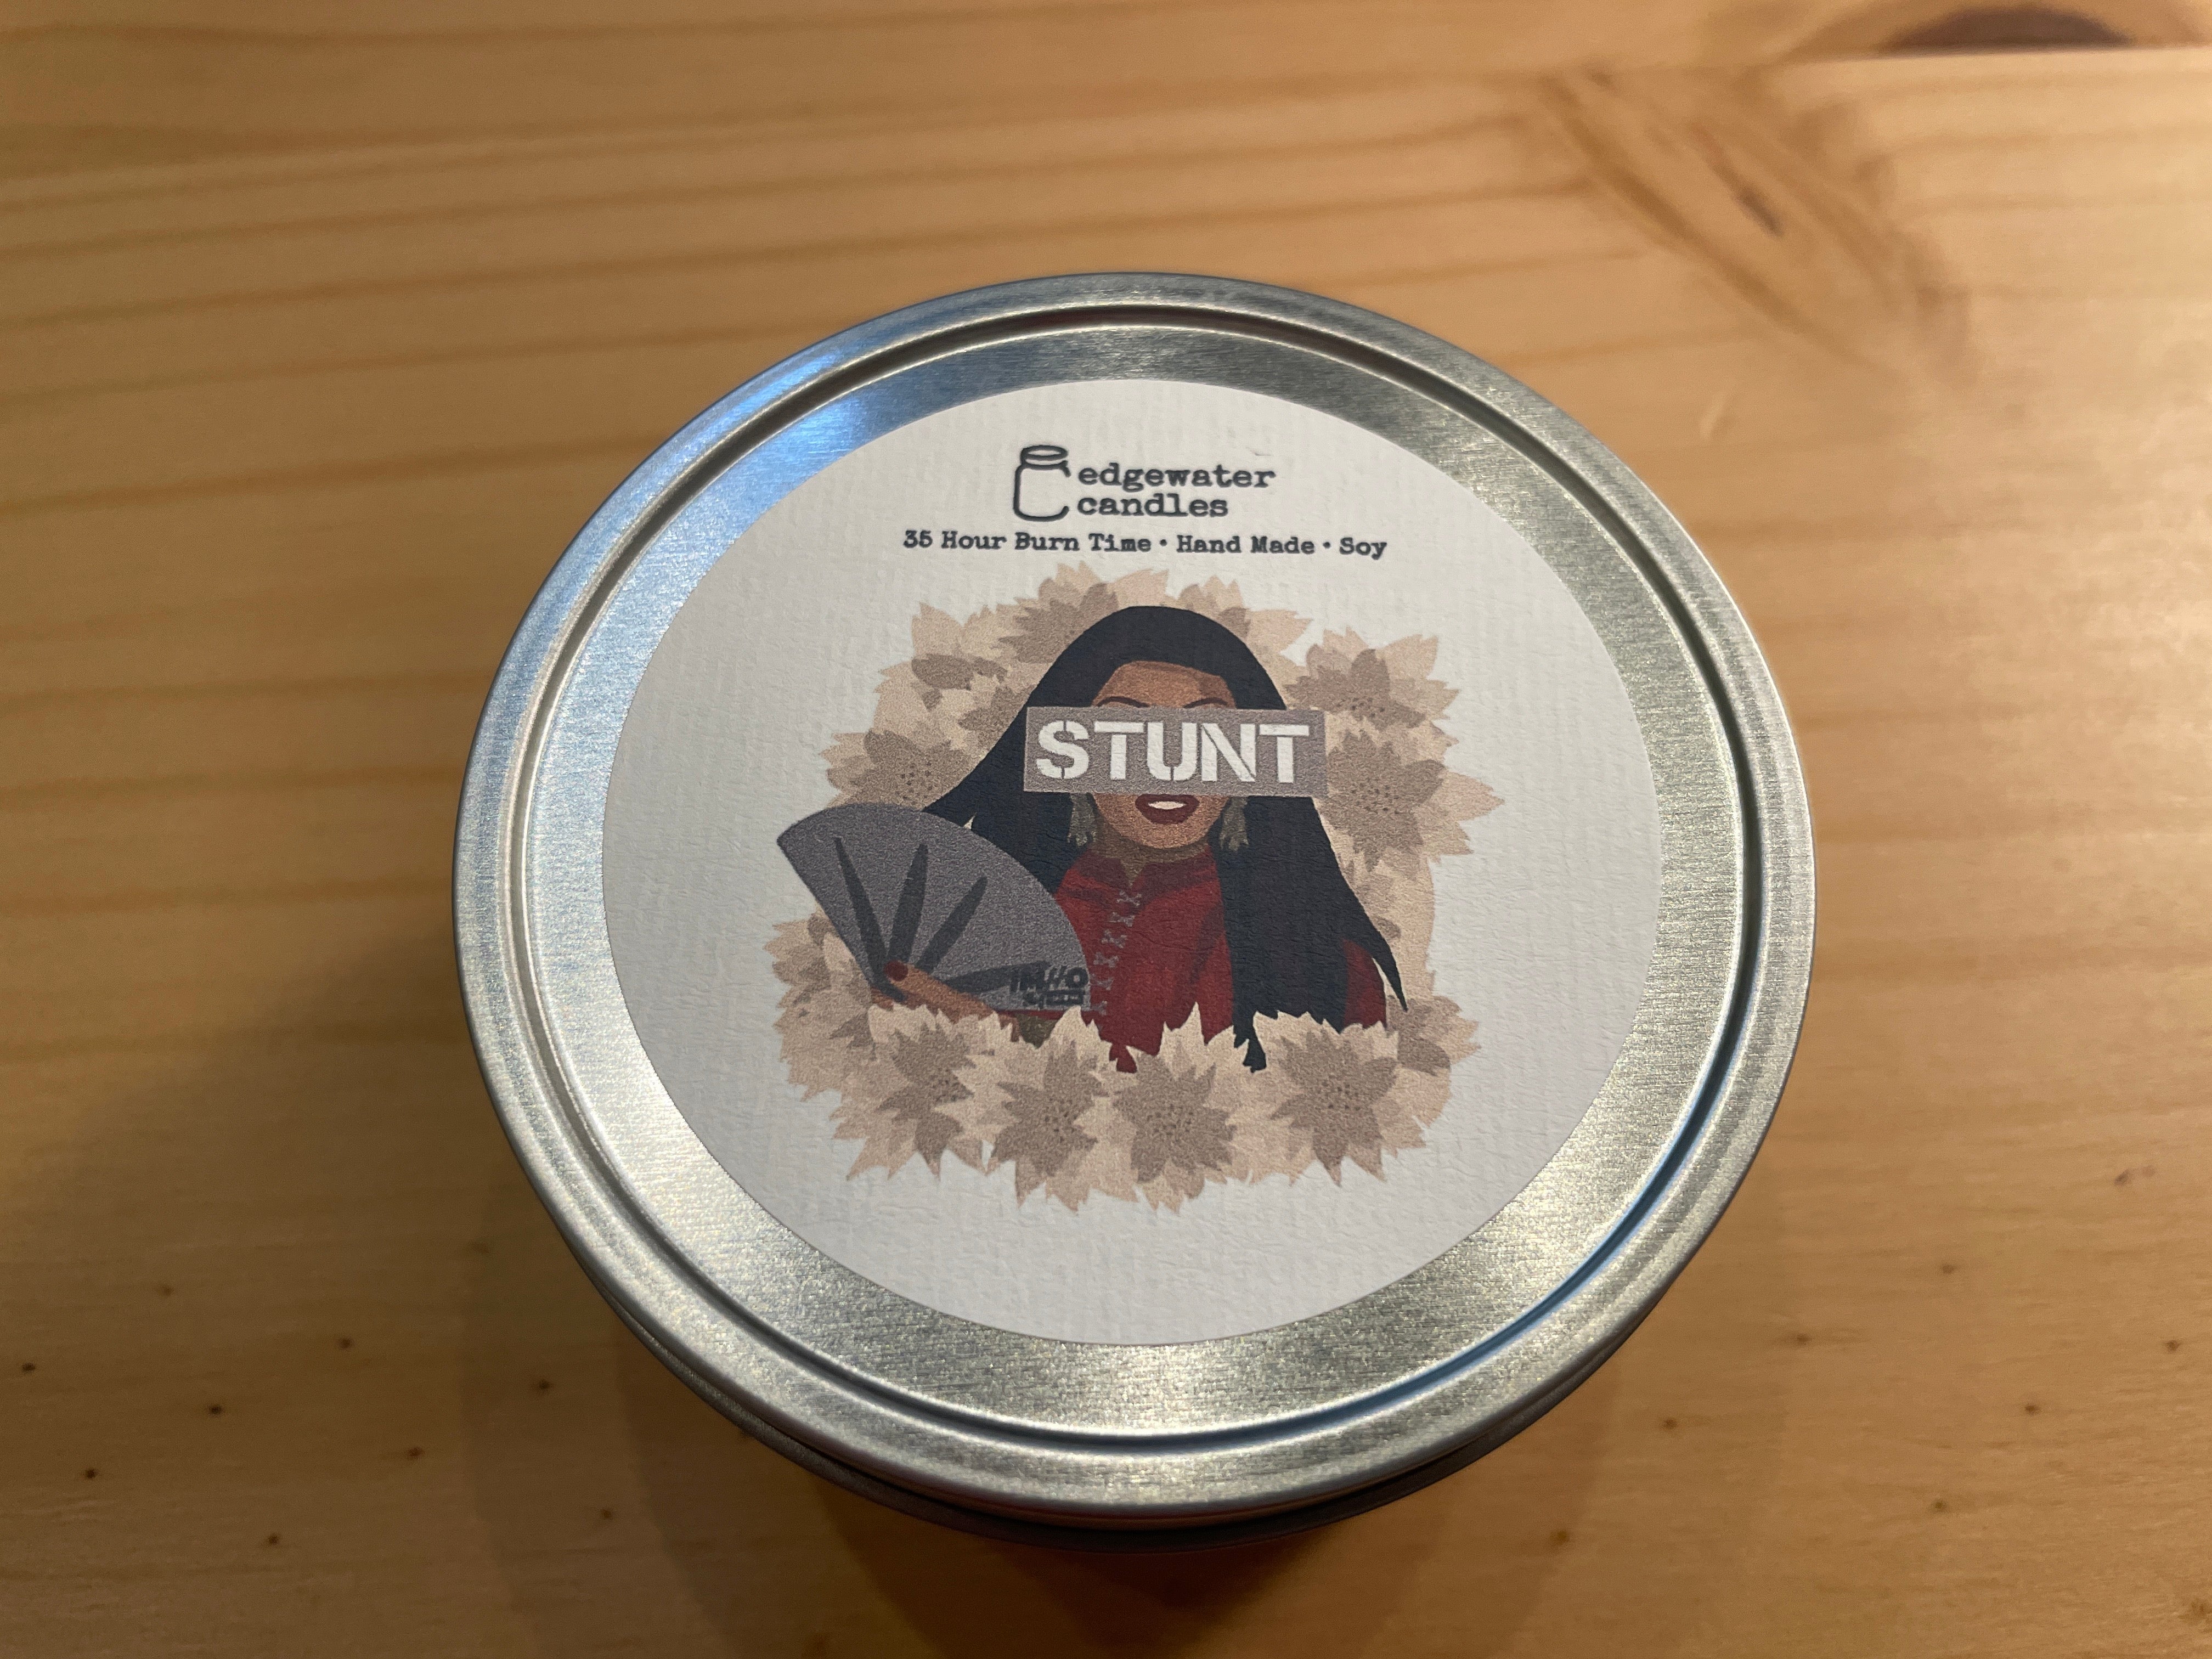 I Smell A Stunt! Custom Candles for IMHO the Show